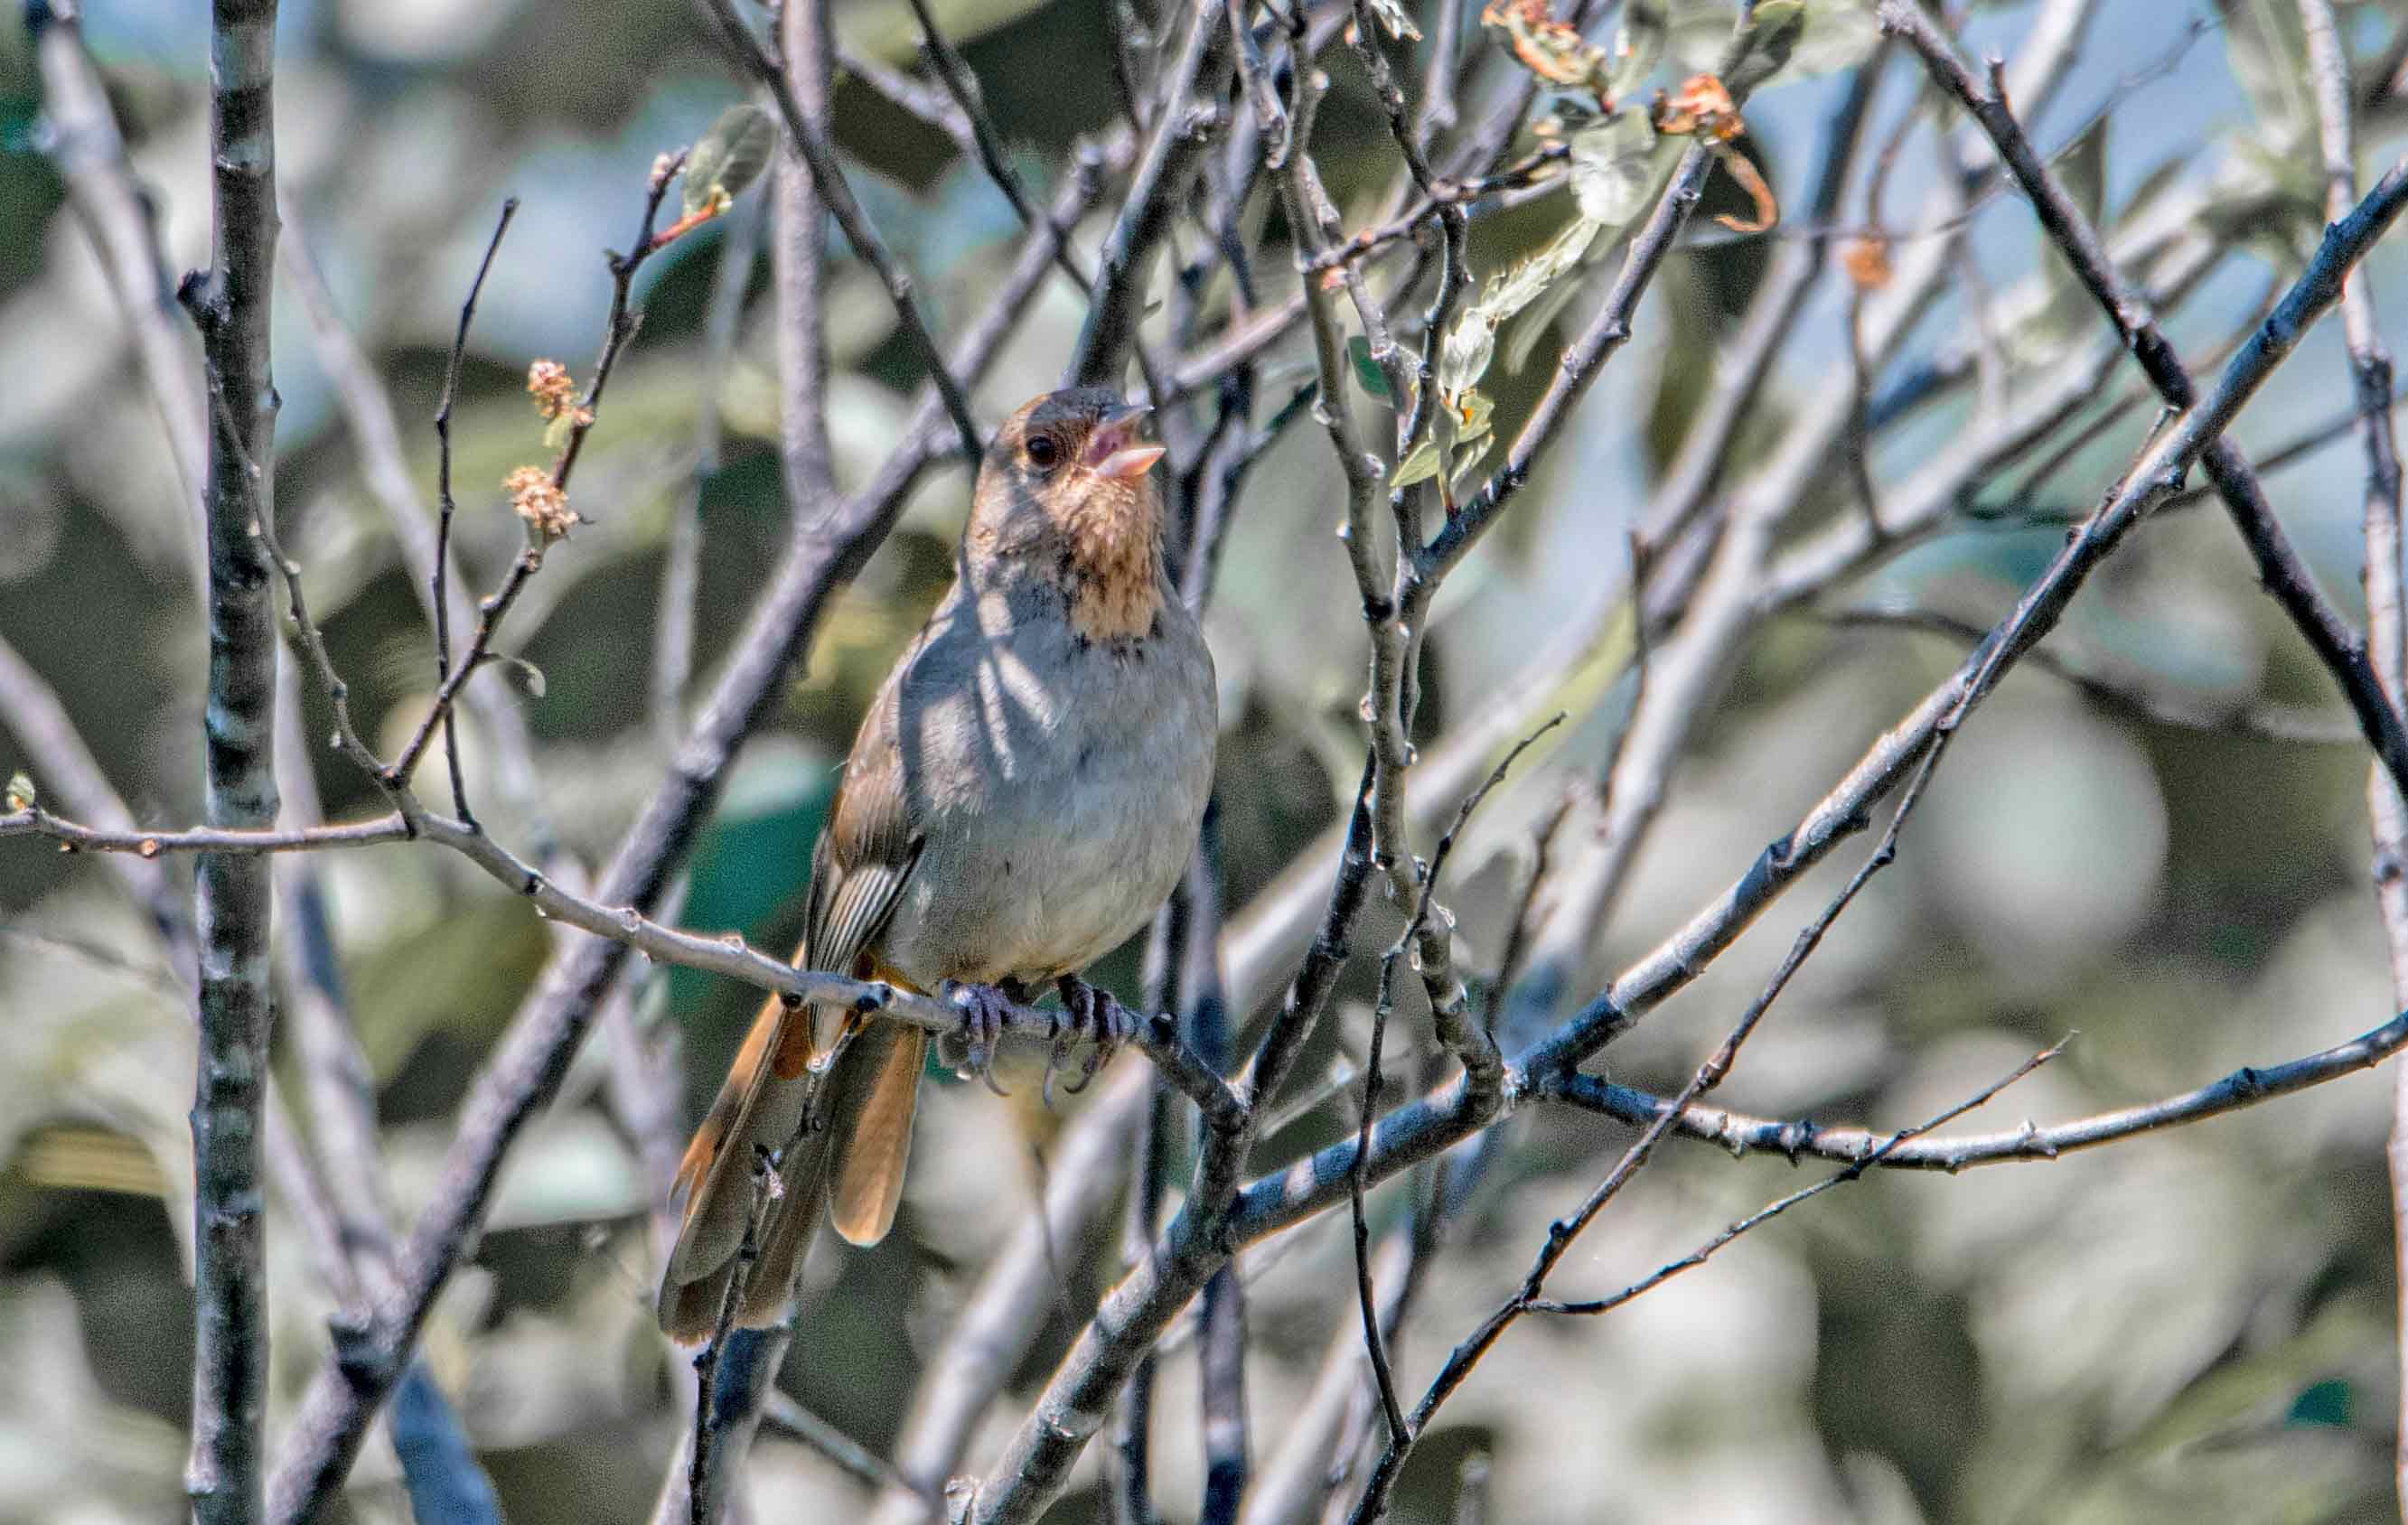 California Towhee greets the day with song